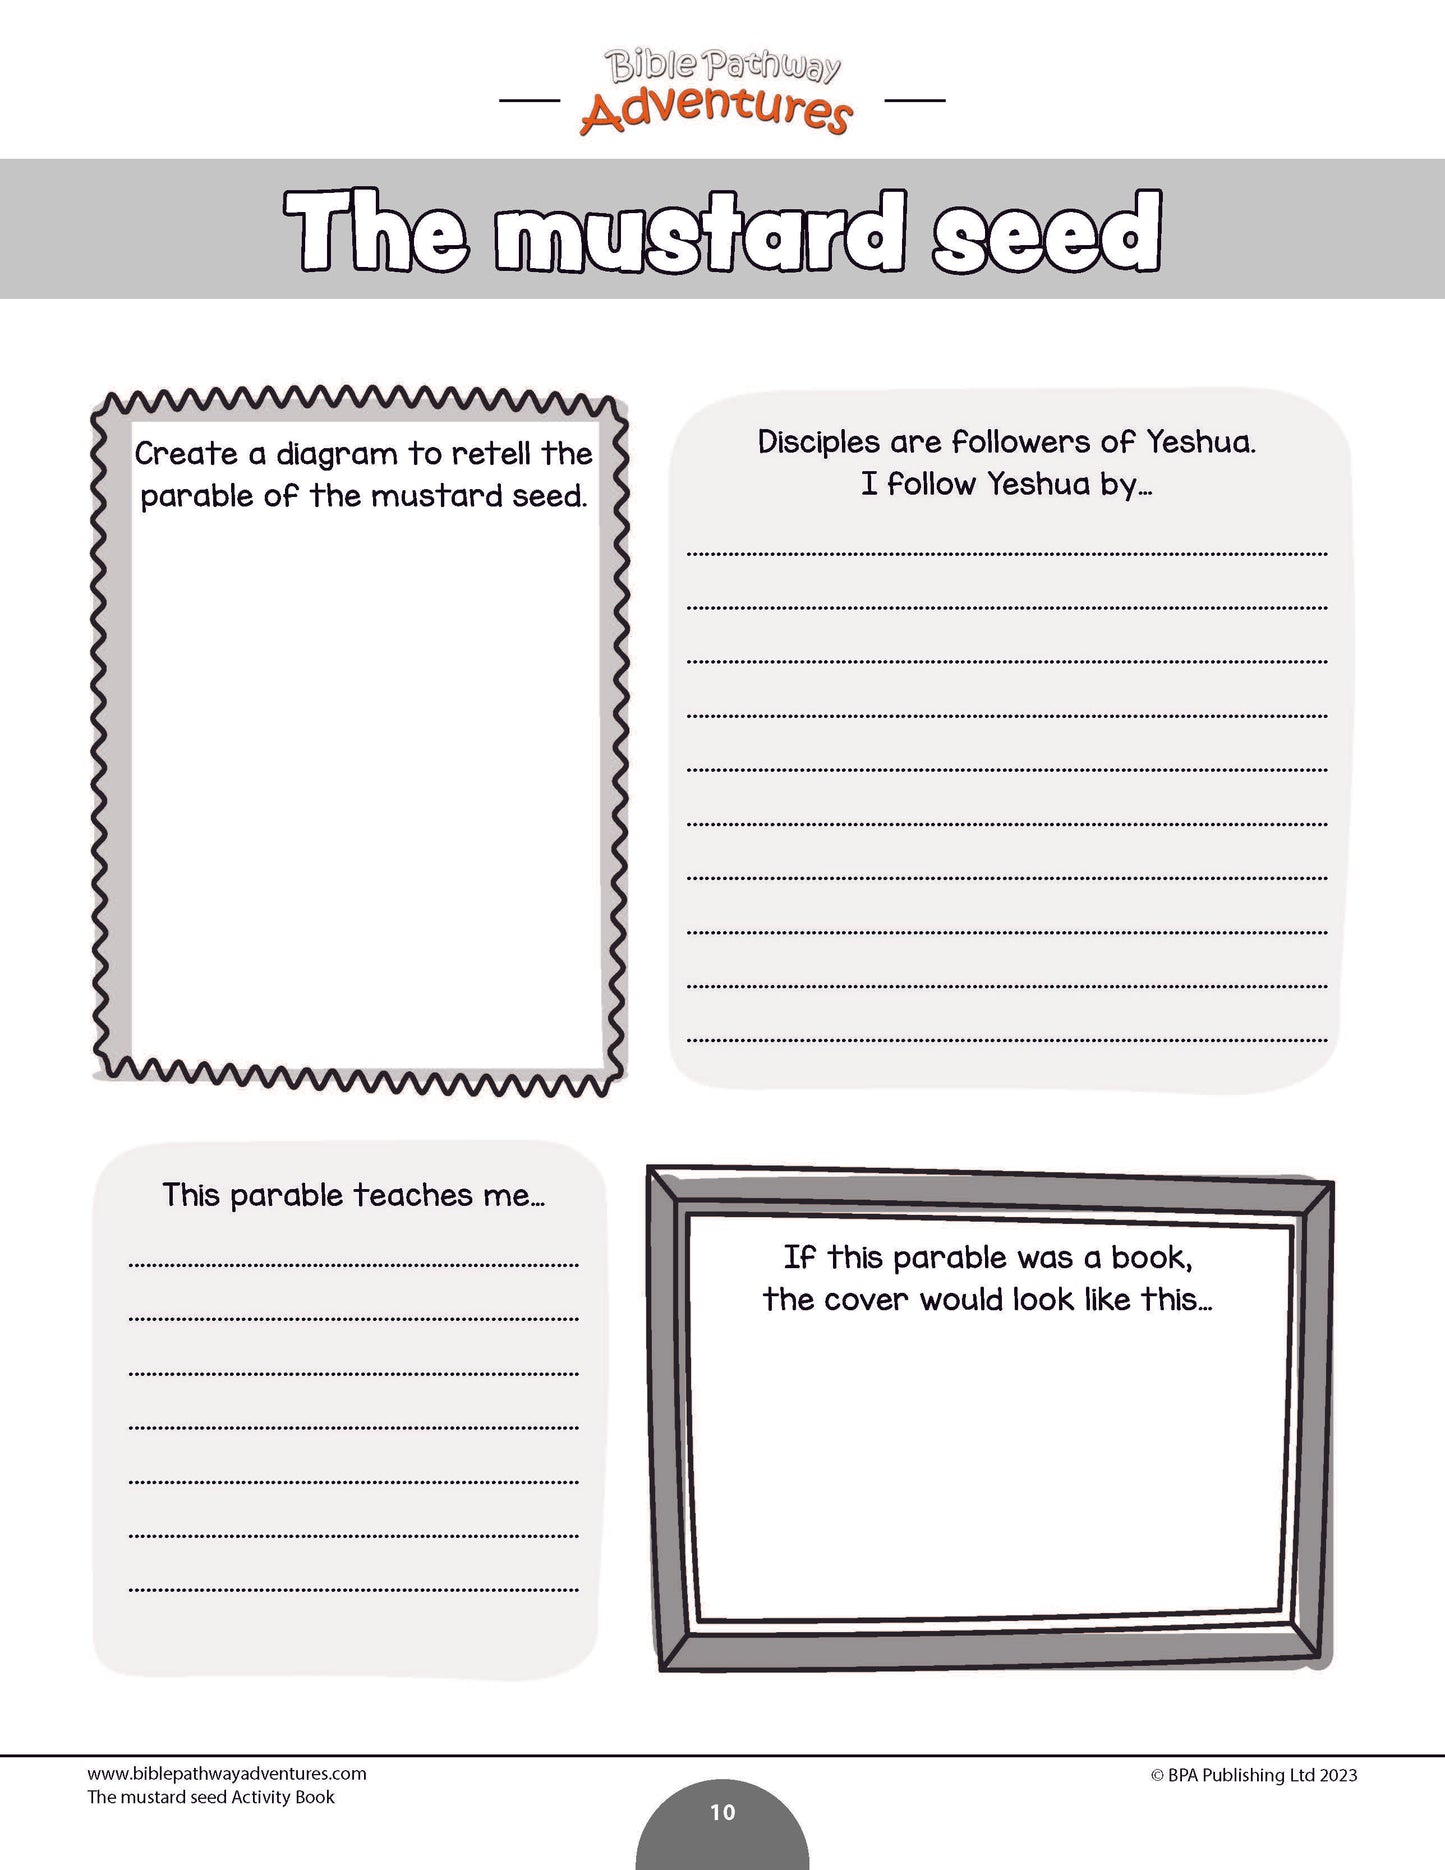 Parable of the Mustard Seed Activity Book (PDF)